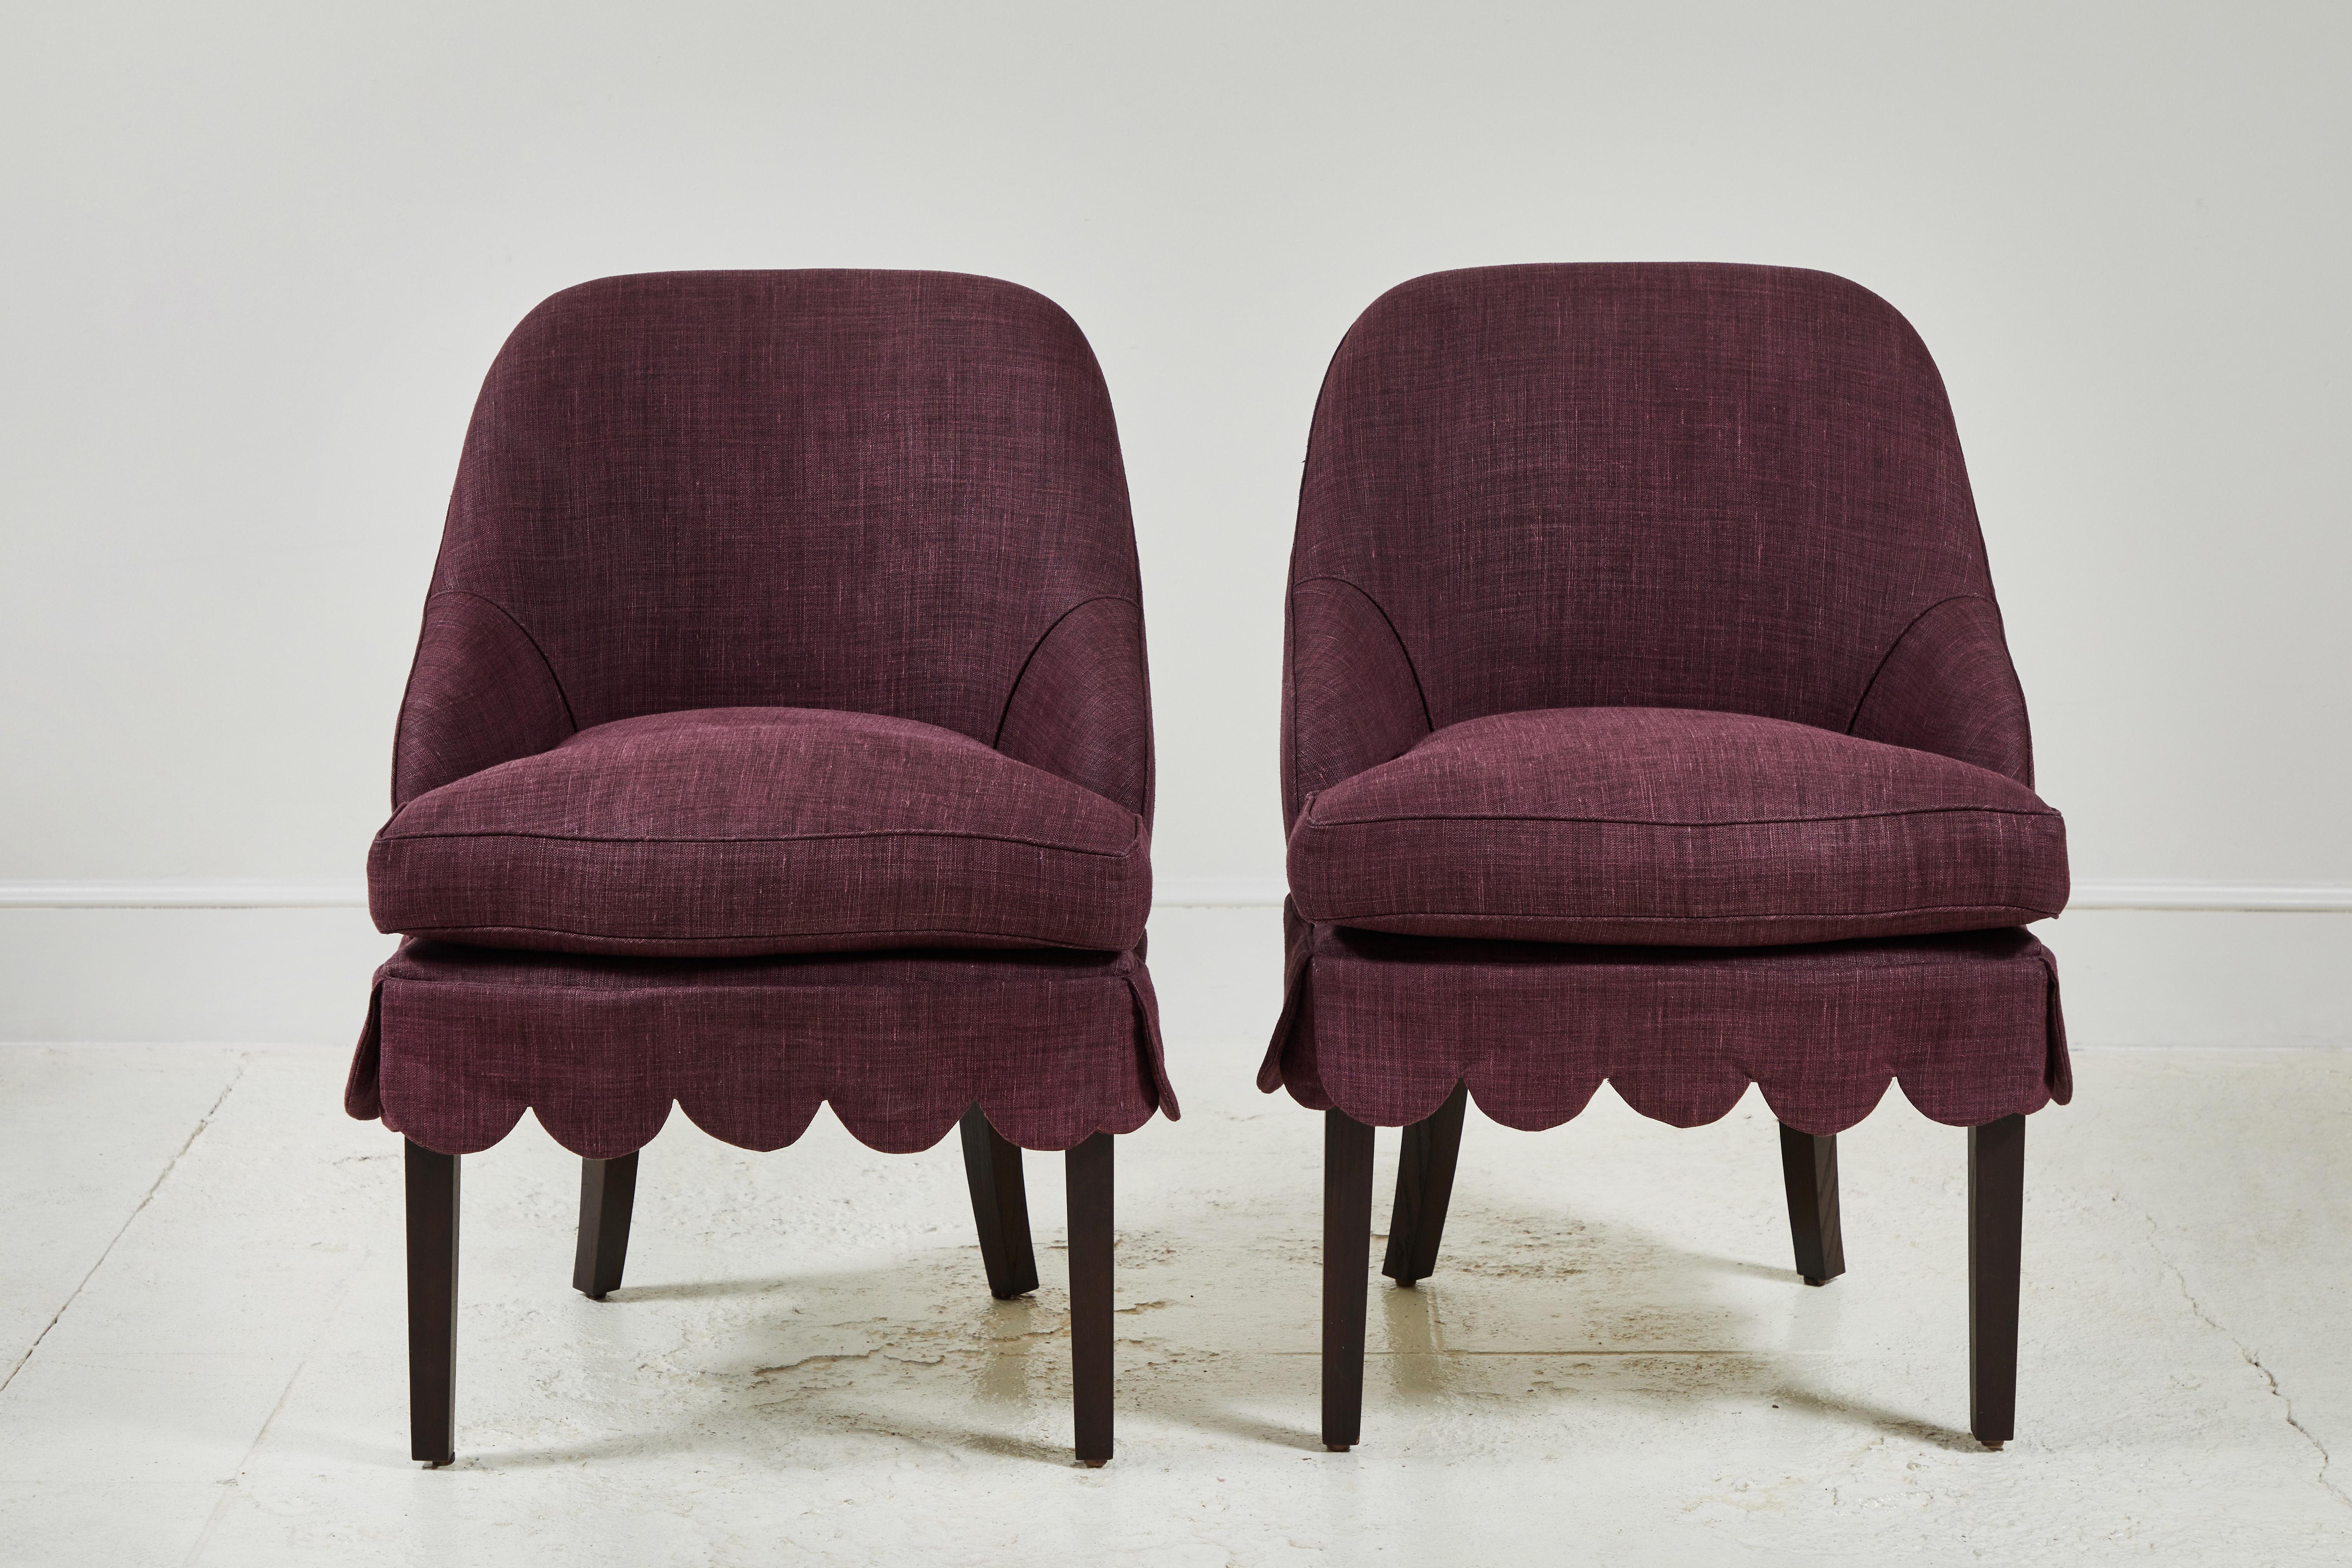 Our simplified expression of a Classic Napoleon III slipper chair finished with a sweet scallop-edged skirt. Carefully considered lumber pitch for table-side seating comfort. Seat cushion featuring down and feather crown for flexible use on both